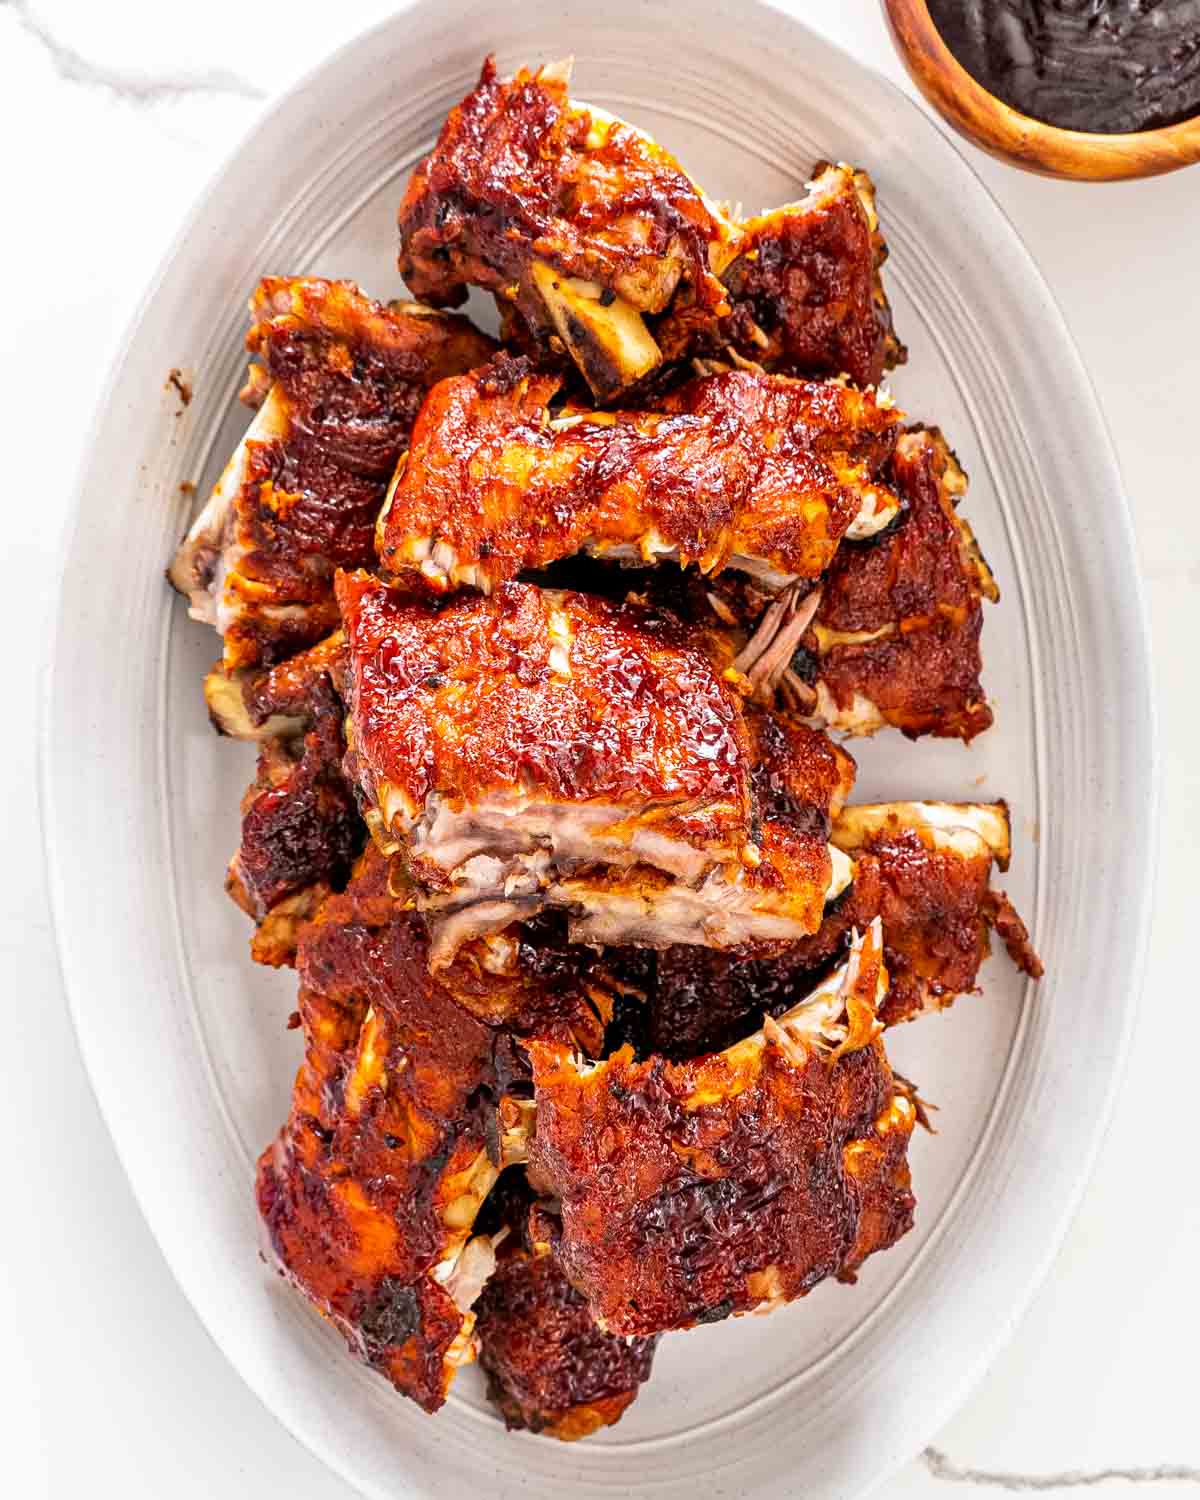 cut up bbq ribs on a white serving platter.